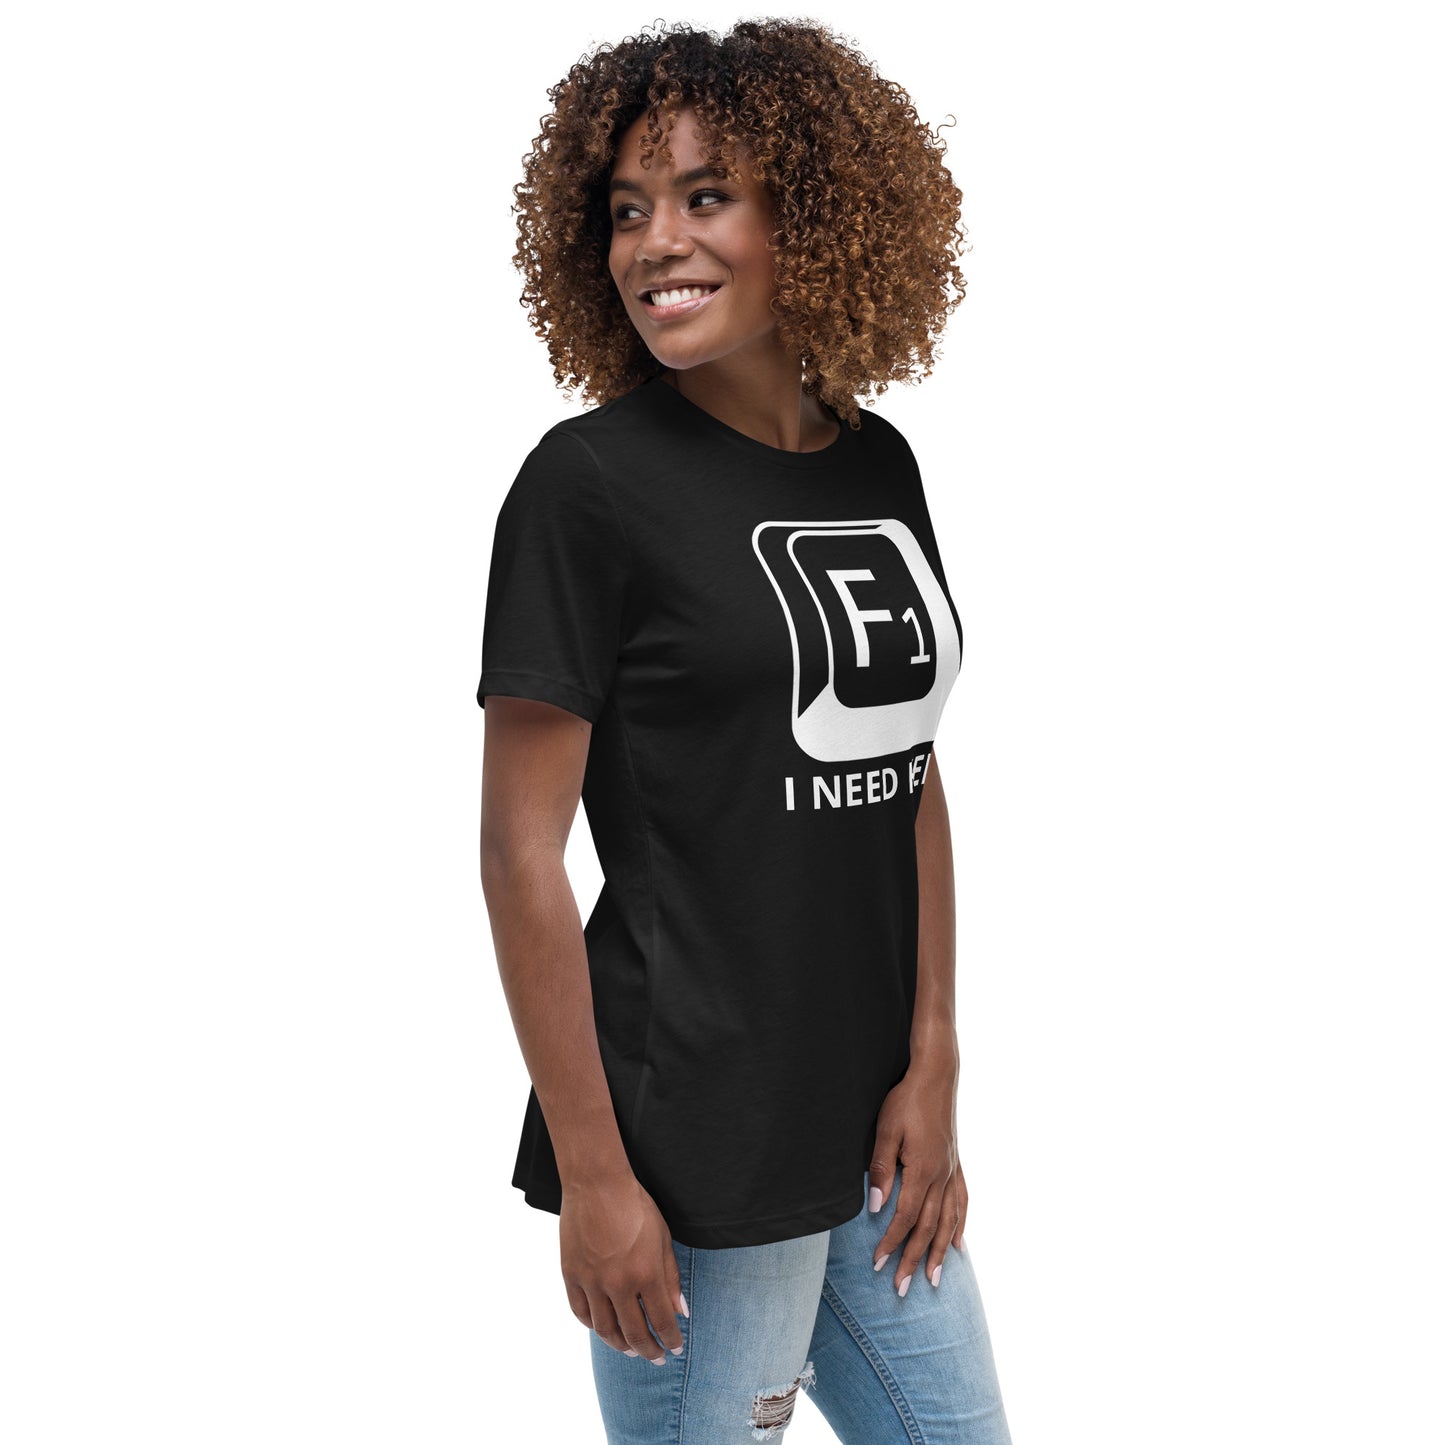 Woman with black t-shirt with picture of "F1" key and text "I need help"